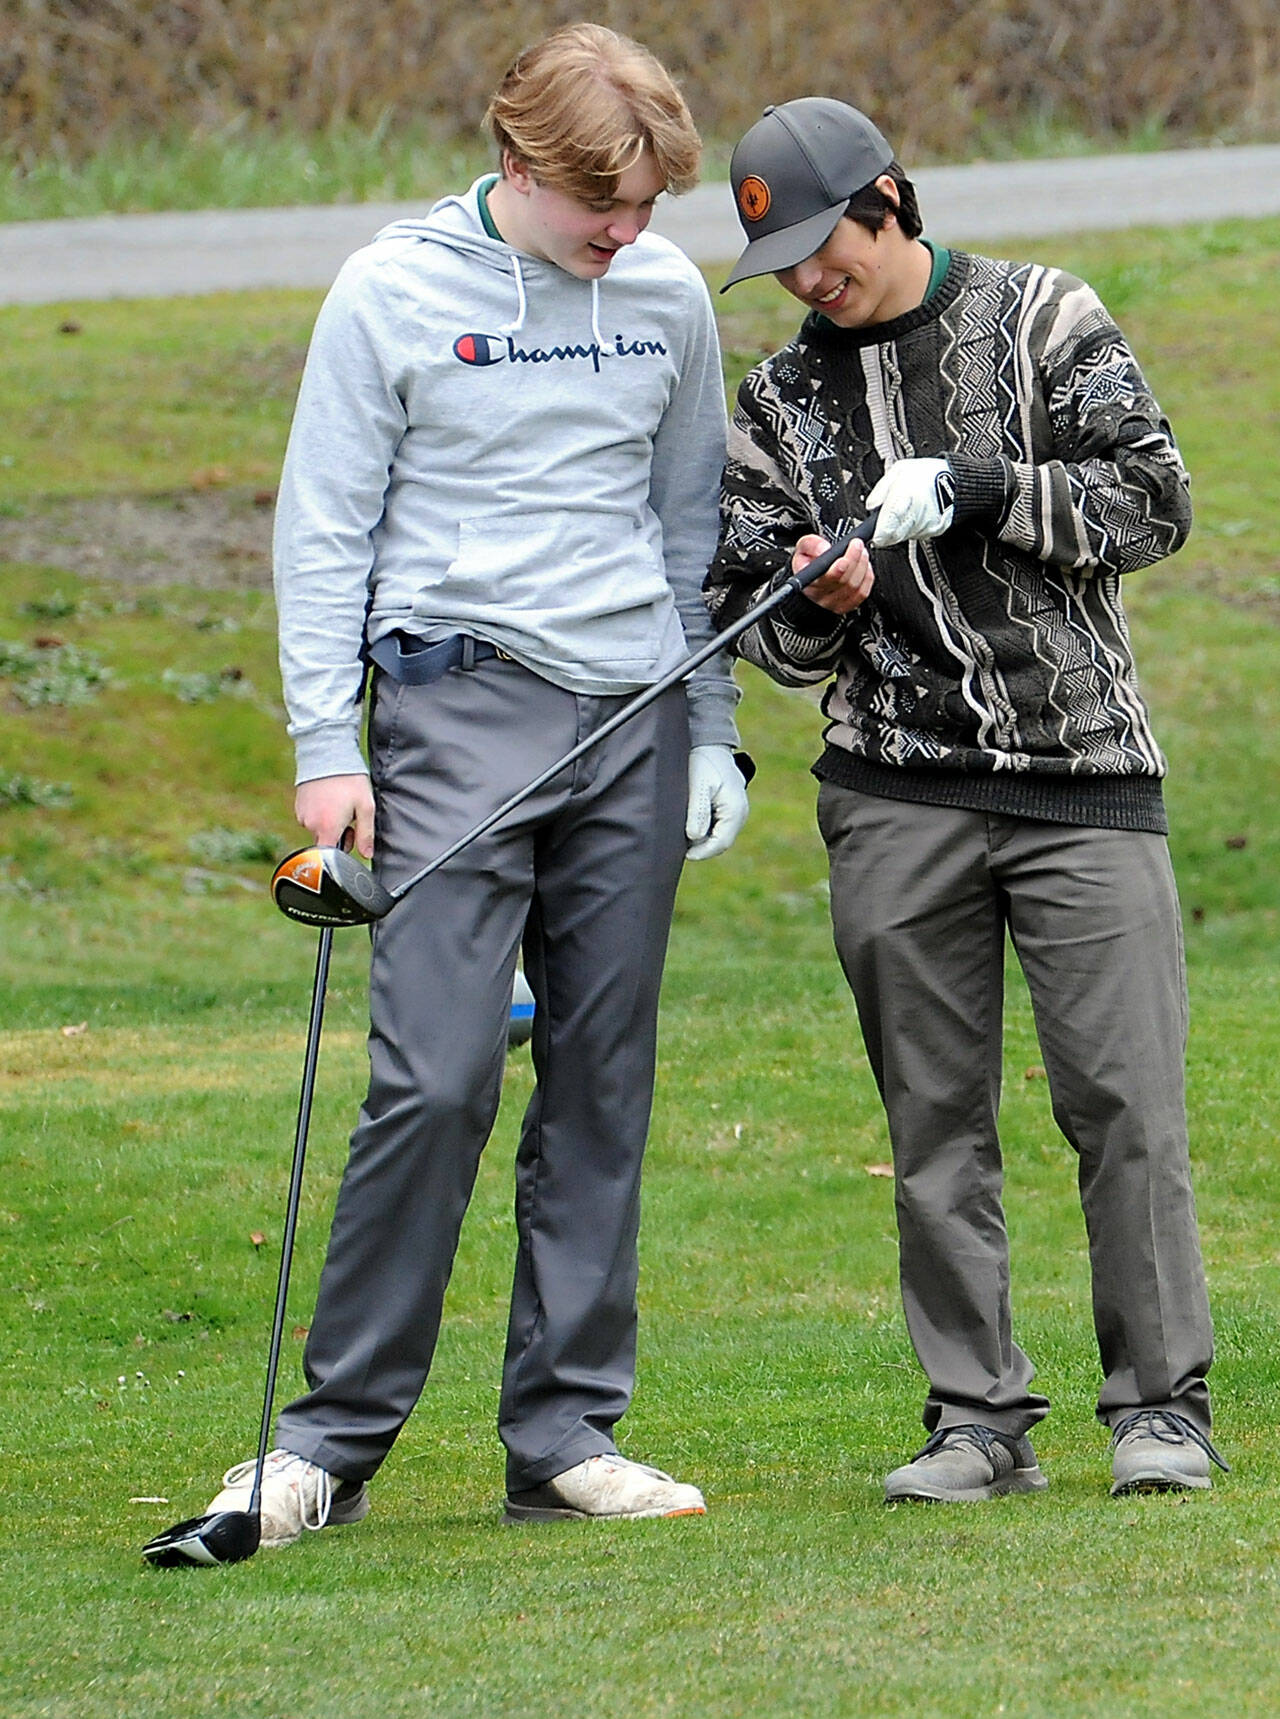 KEITH THORPE/PENINSULA DAILY NEWS Port Angeles golfers Nate Anderson, left, and Phoenix Flores examine Flores’ club on the first hole of Thursday’s match against Sequim at Peninsula Golf Club.